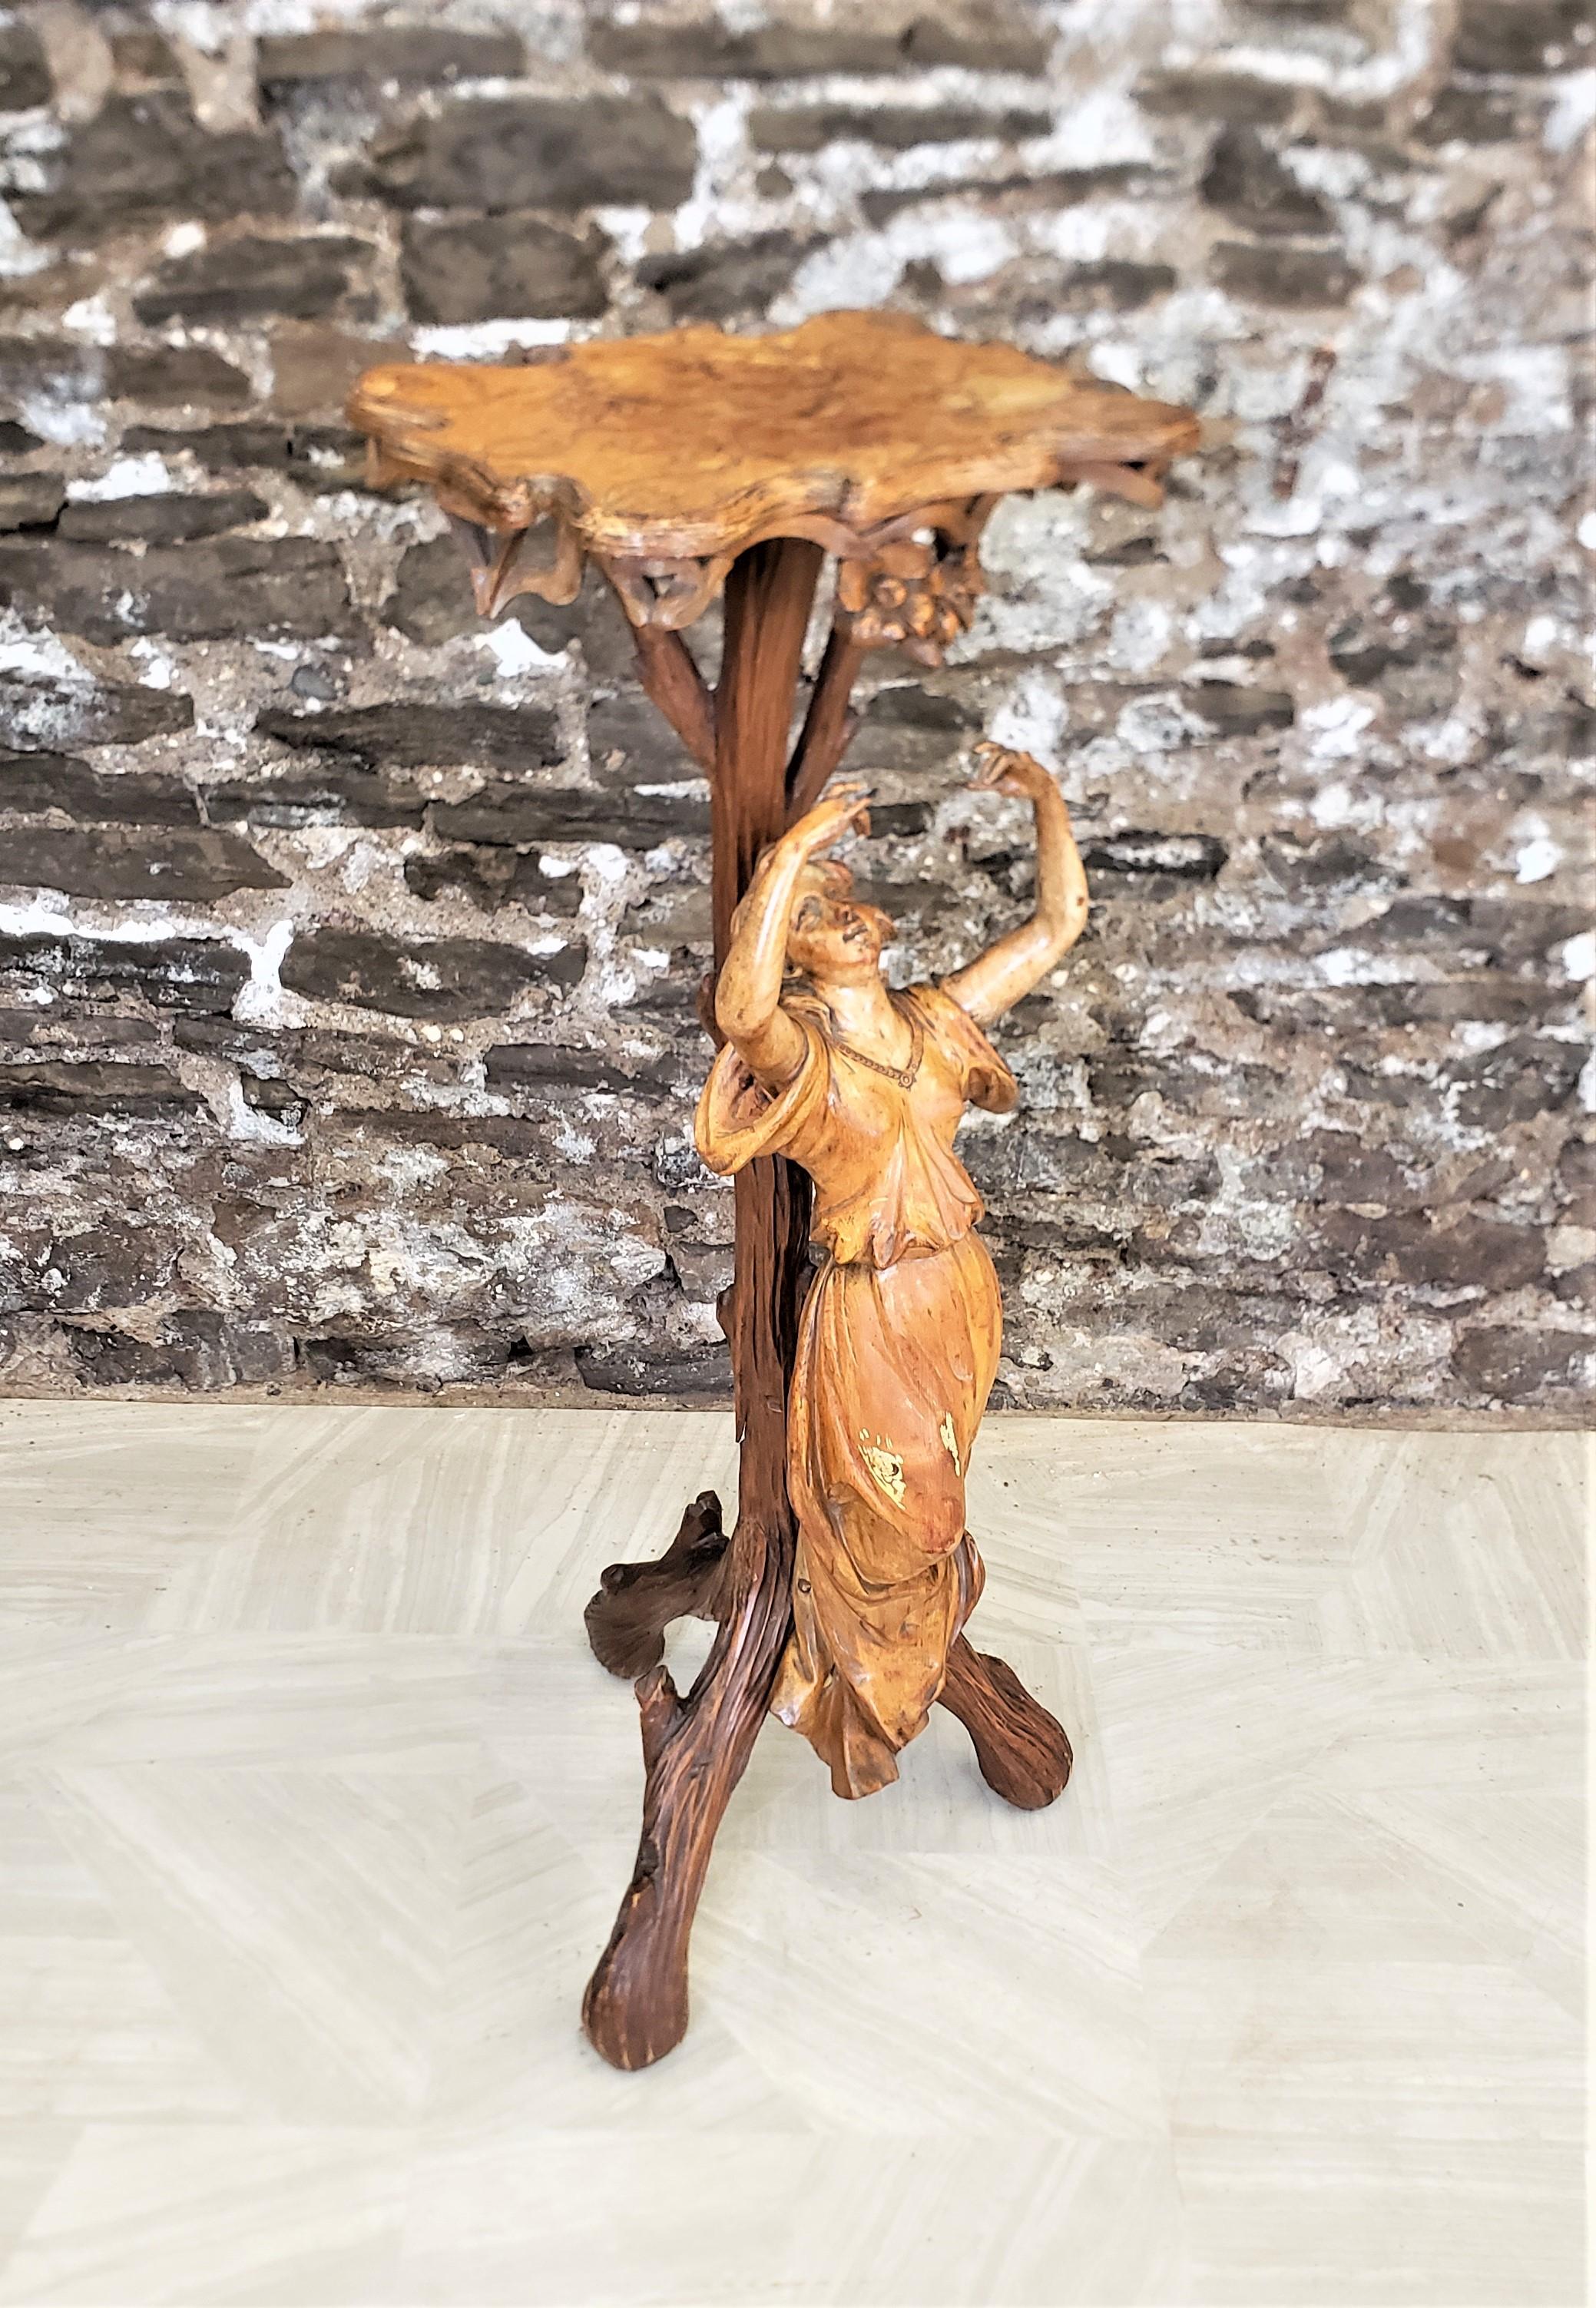 Italian Antique Folk Art Grape Vine Table with Hand-Carved Woman & Floral Details For Sale